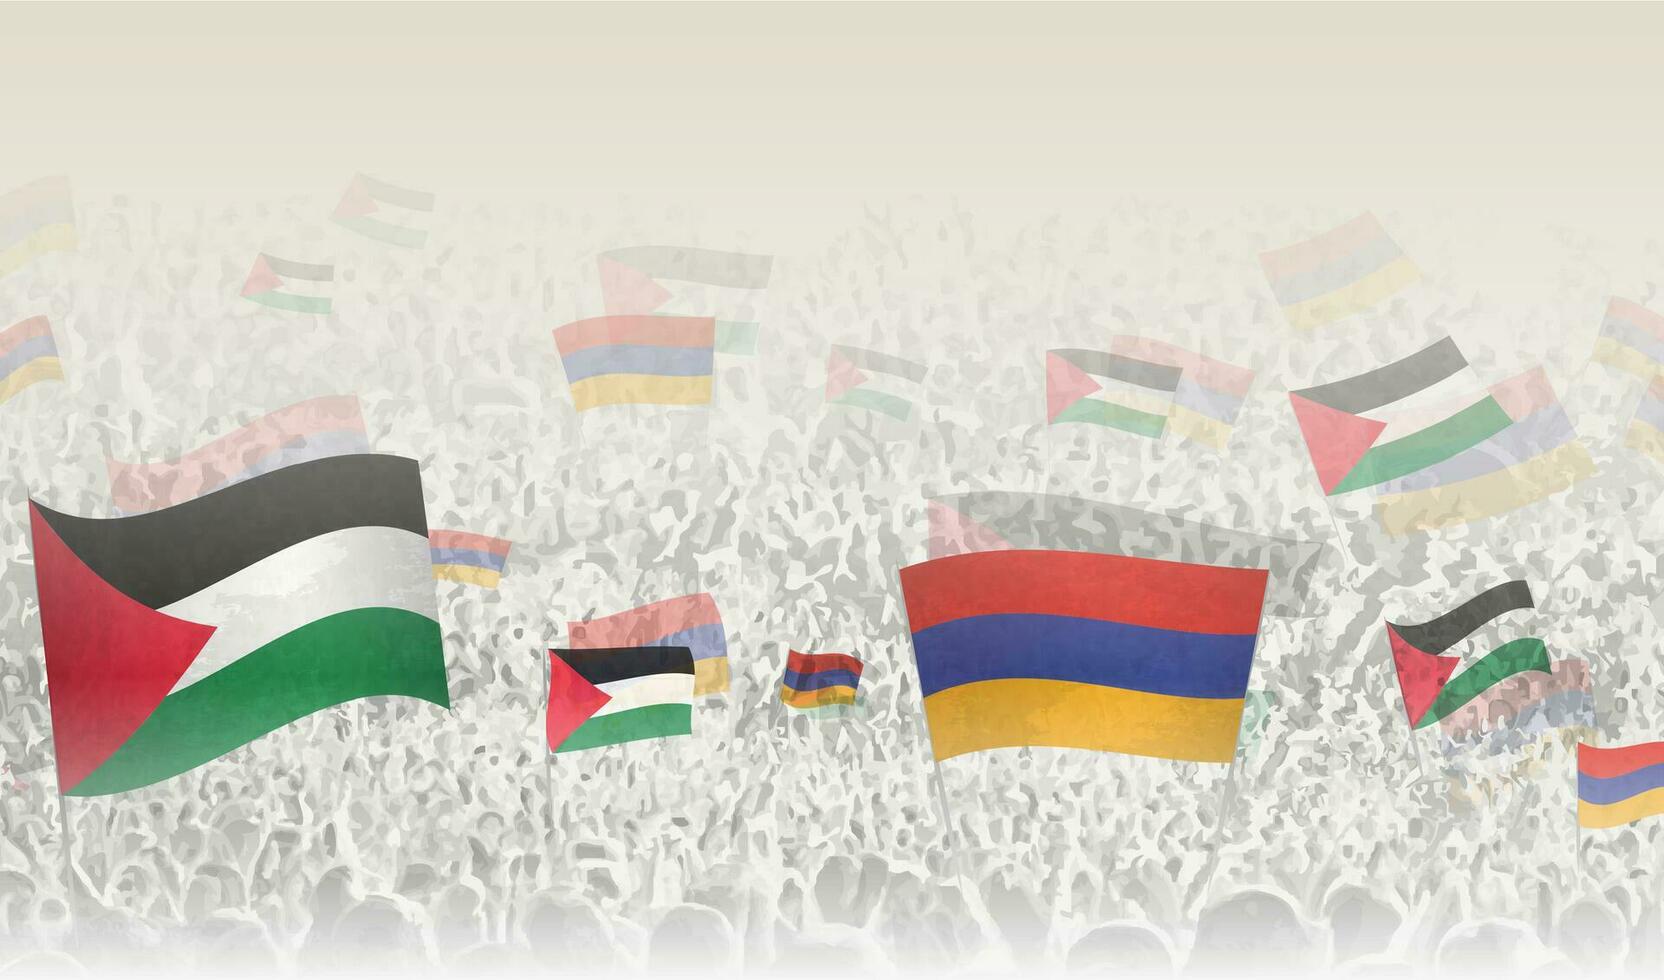 Palestine and Armenia flags in a crowd of cheering people. vector